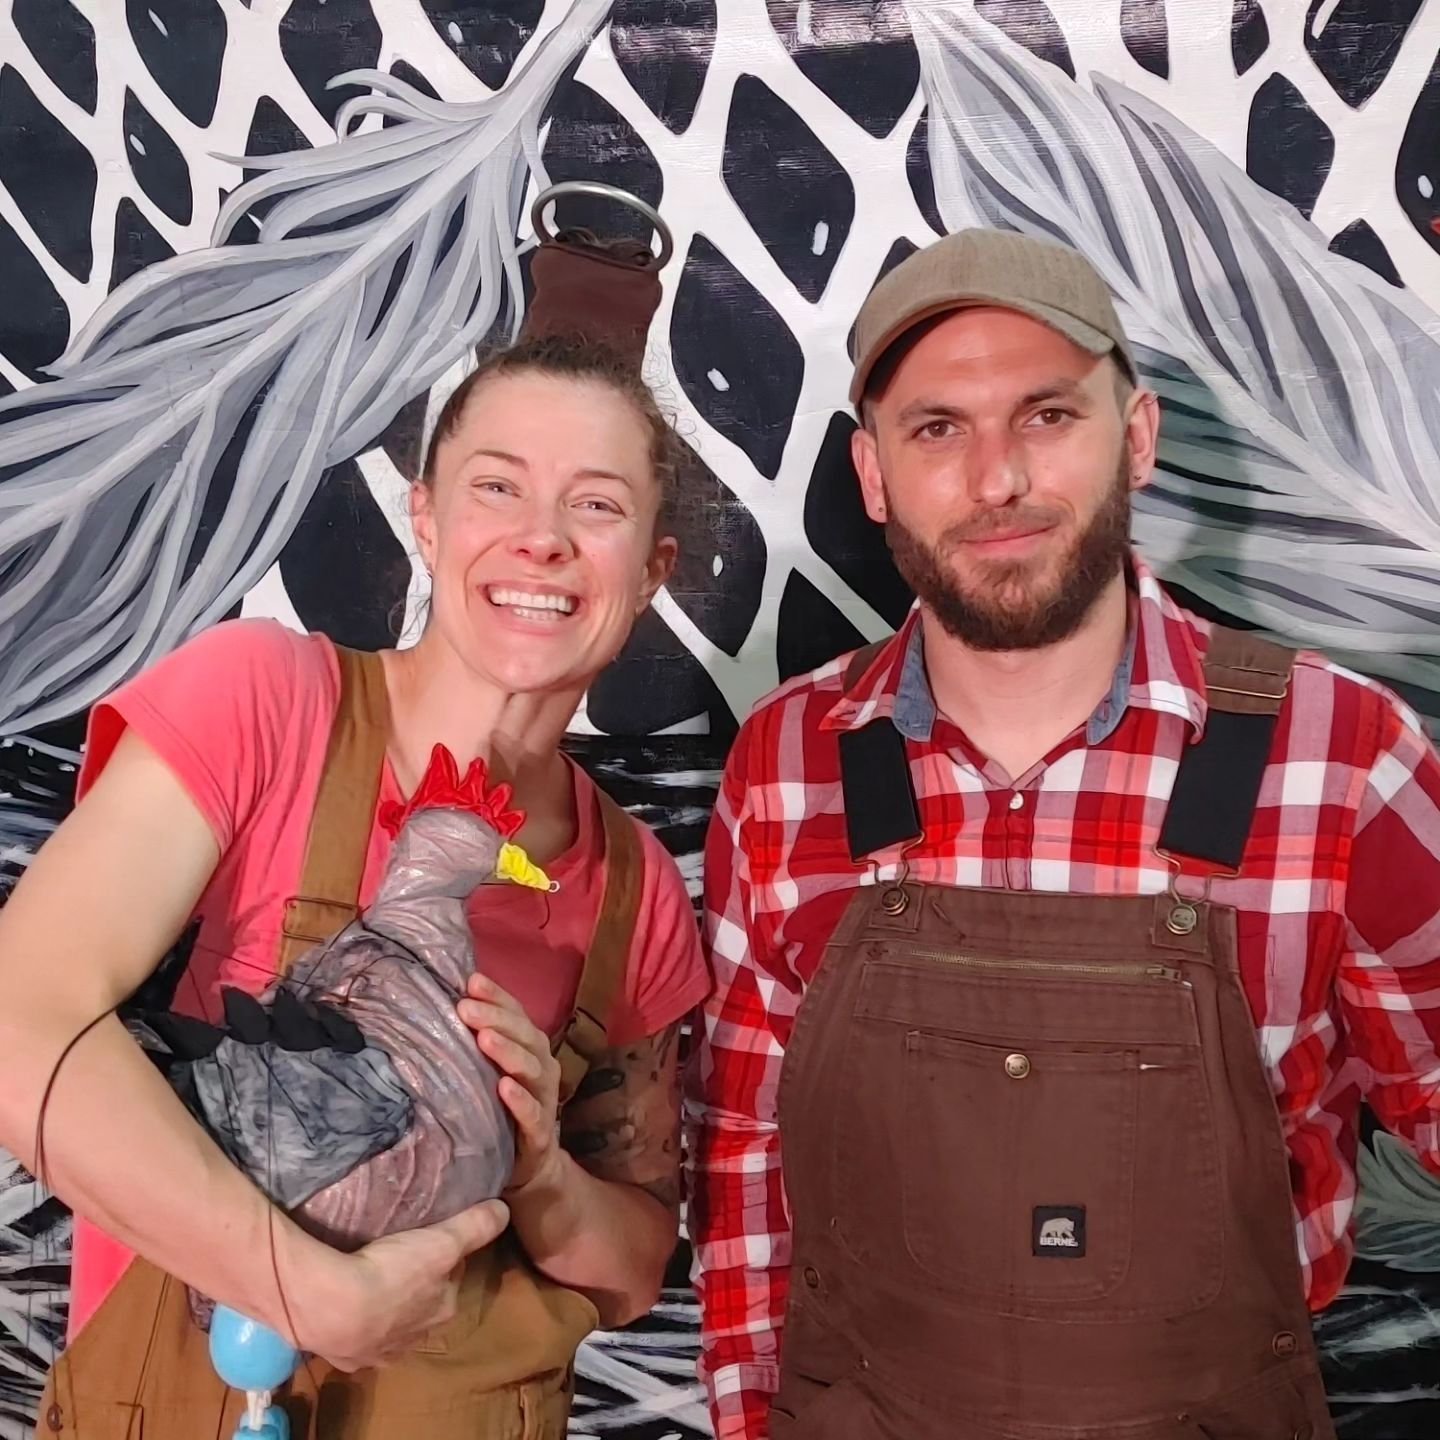 More chicken photos to promote our show A Hen Called Freedom. 

 We said it already but this show is based on lived experience working with chickens on many different farms and in our own backyard. 

Jeremy and Nicole are excited to present the work-